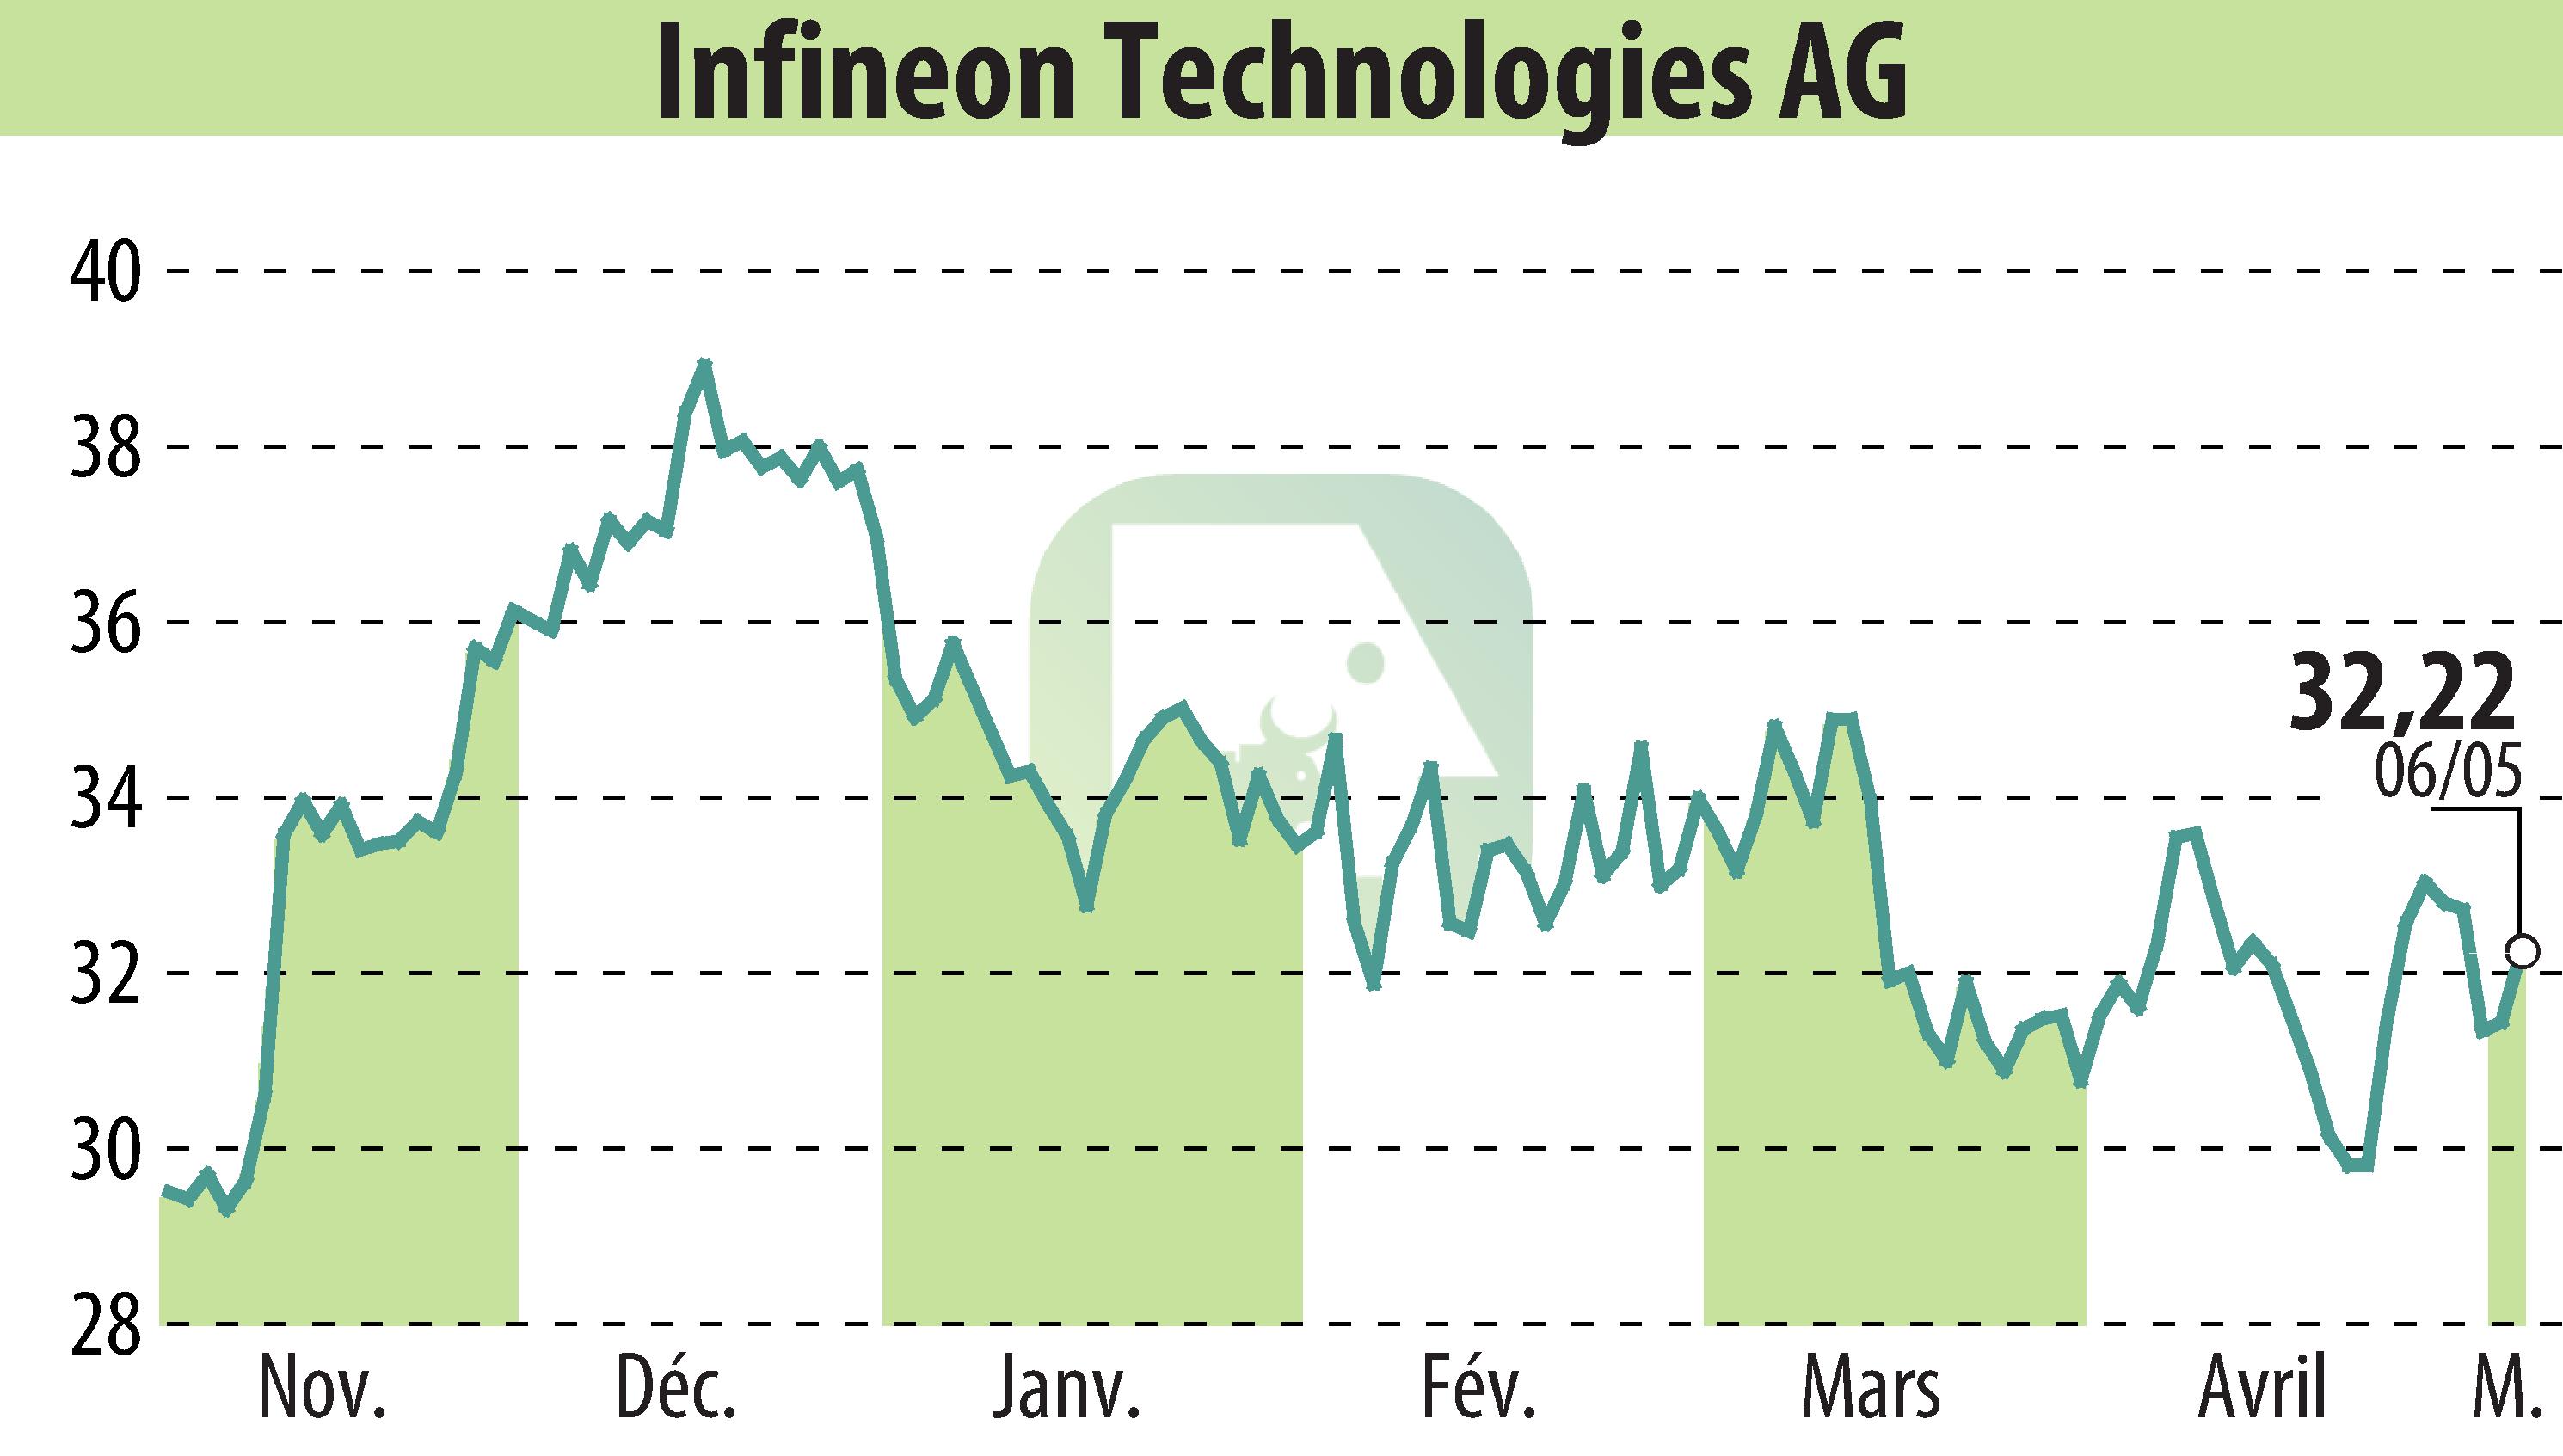 Stock price chart of Infineon Technologies AG (EBR:IFX) showing fluctuations.